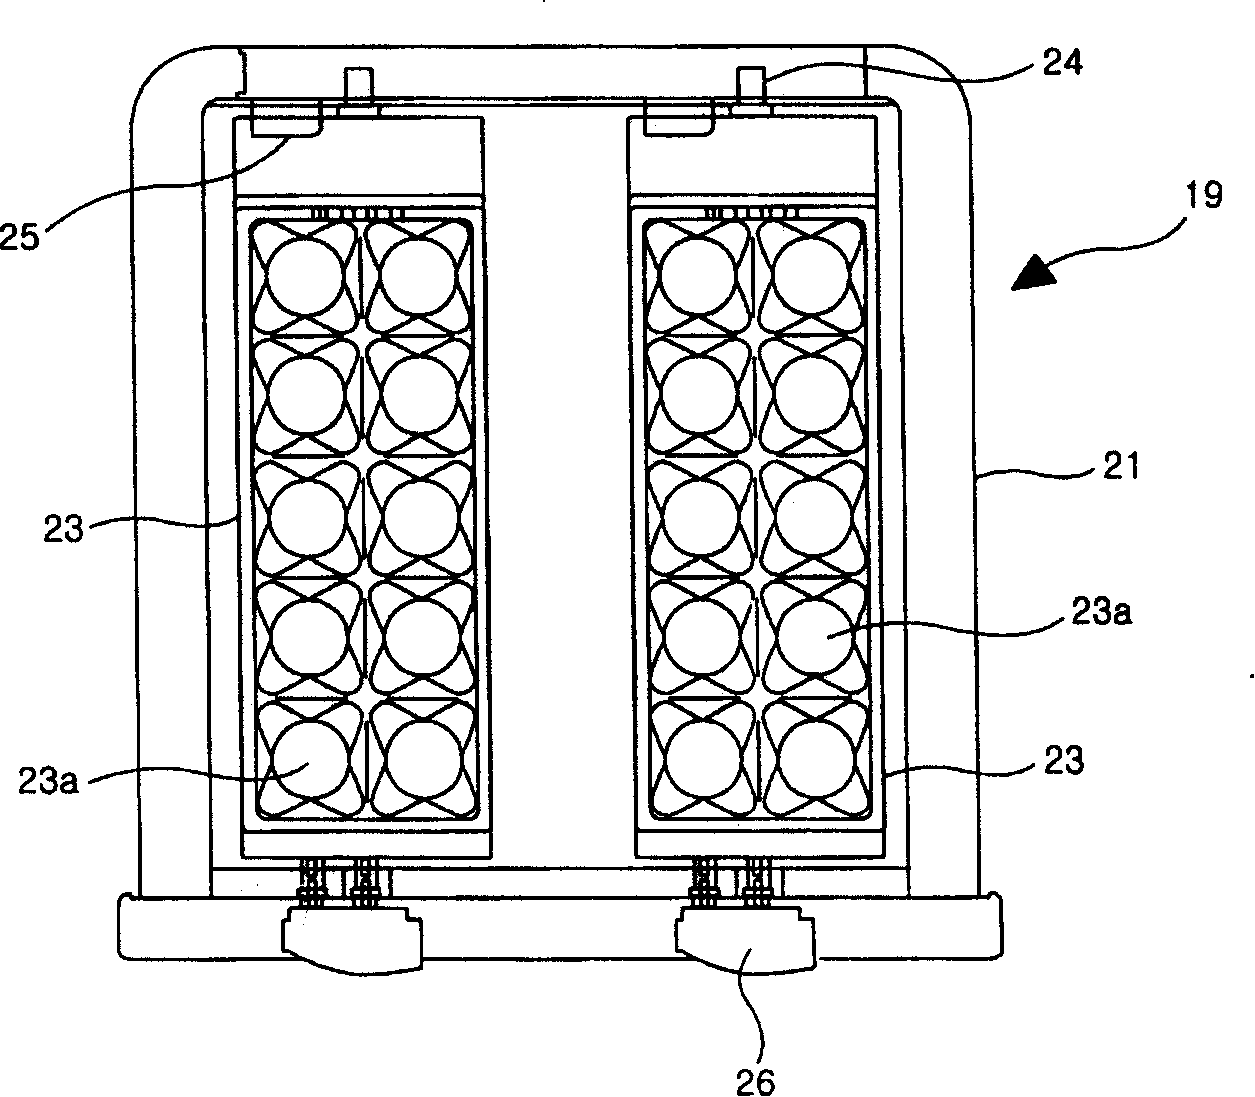 Ice-making apparatus for refrigerator